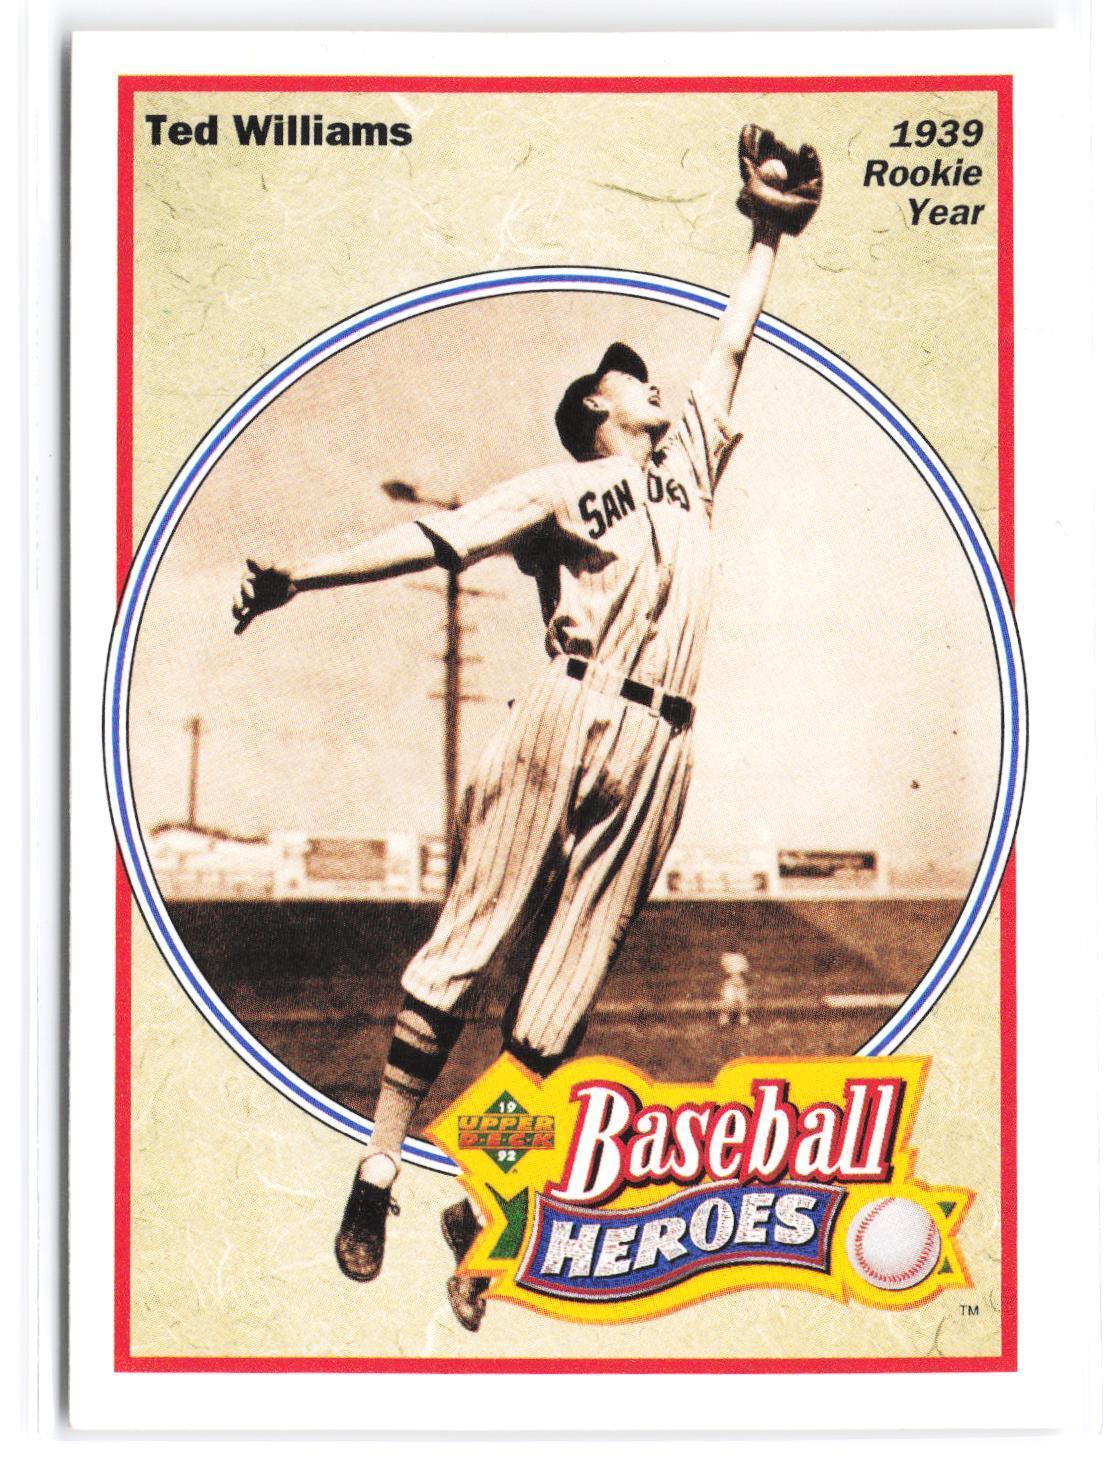 1992 Upper Deck #28 Ted Williams Baseball Heroes: Ted Williams